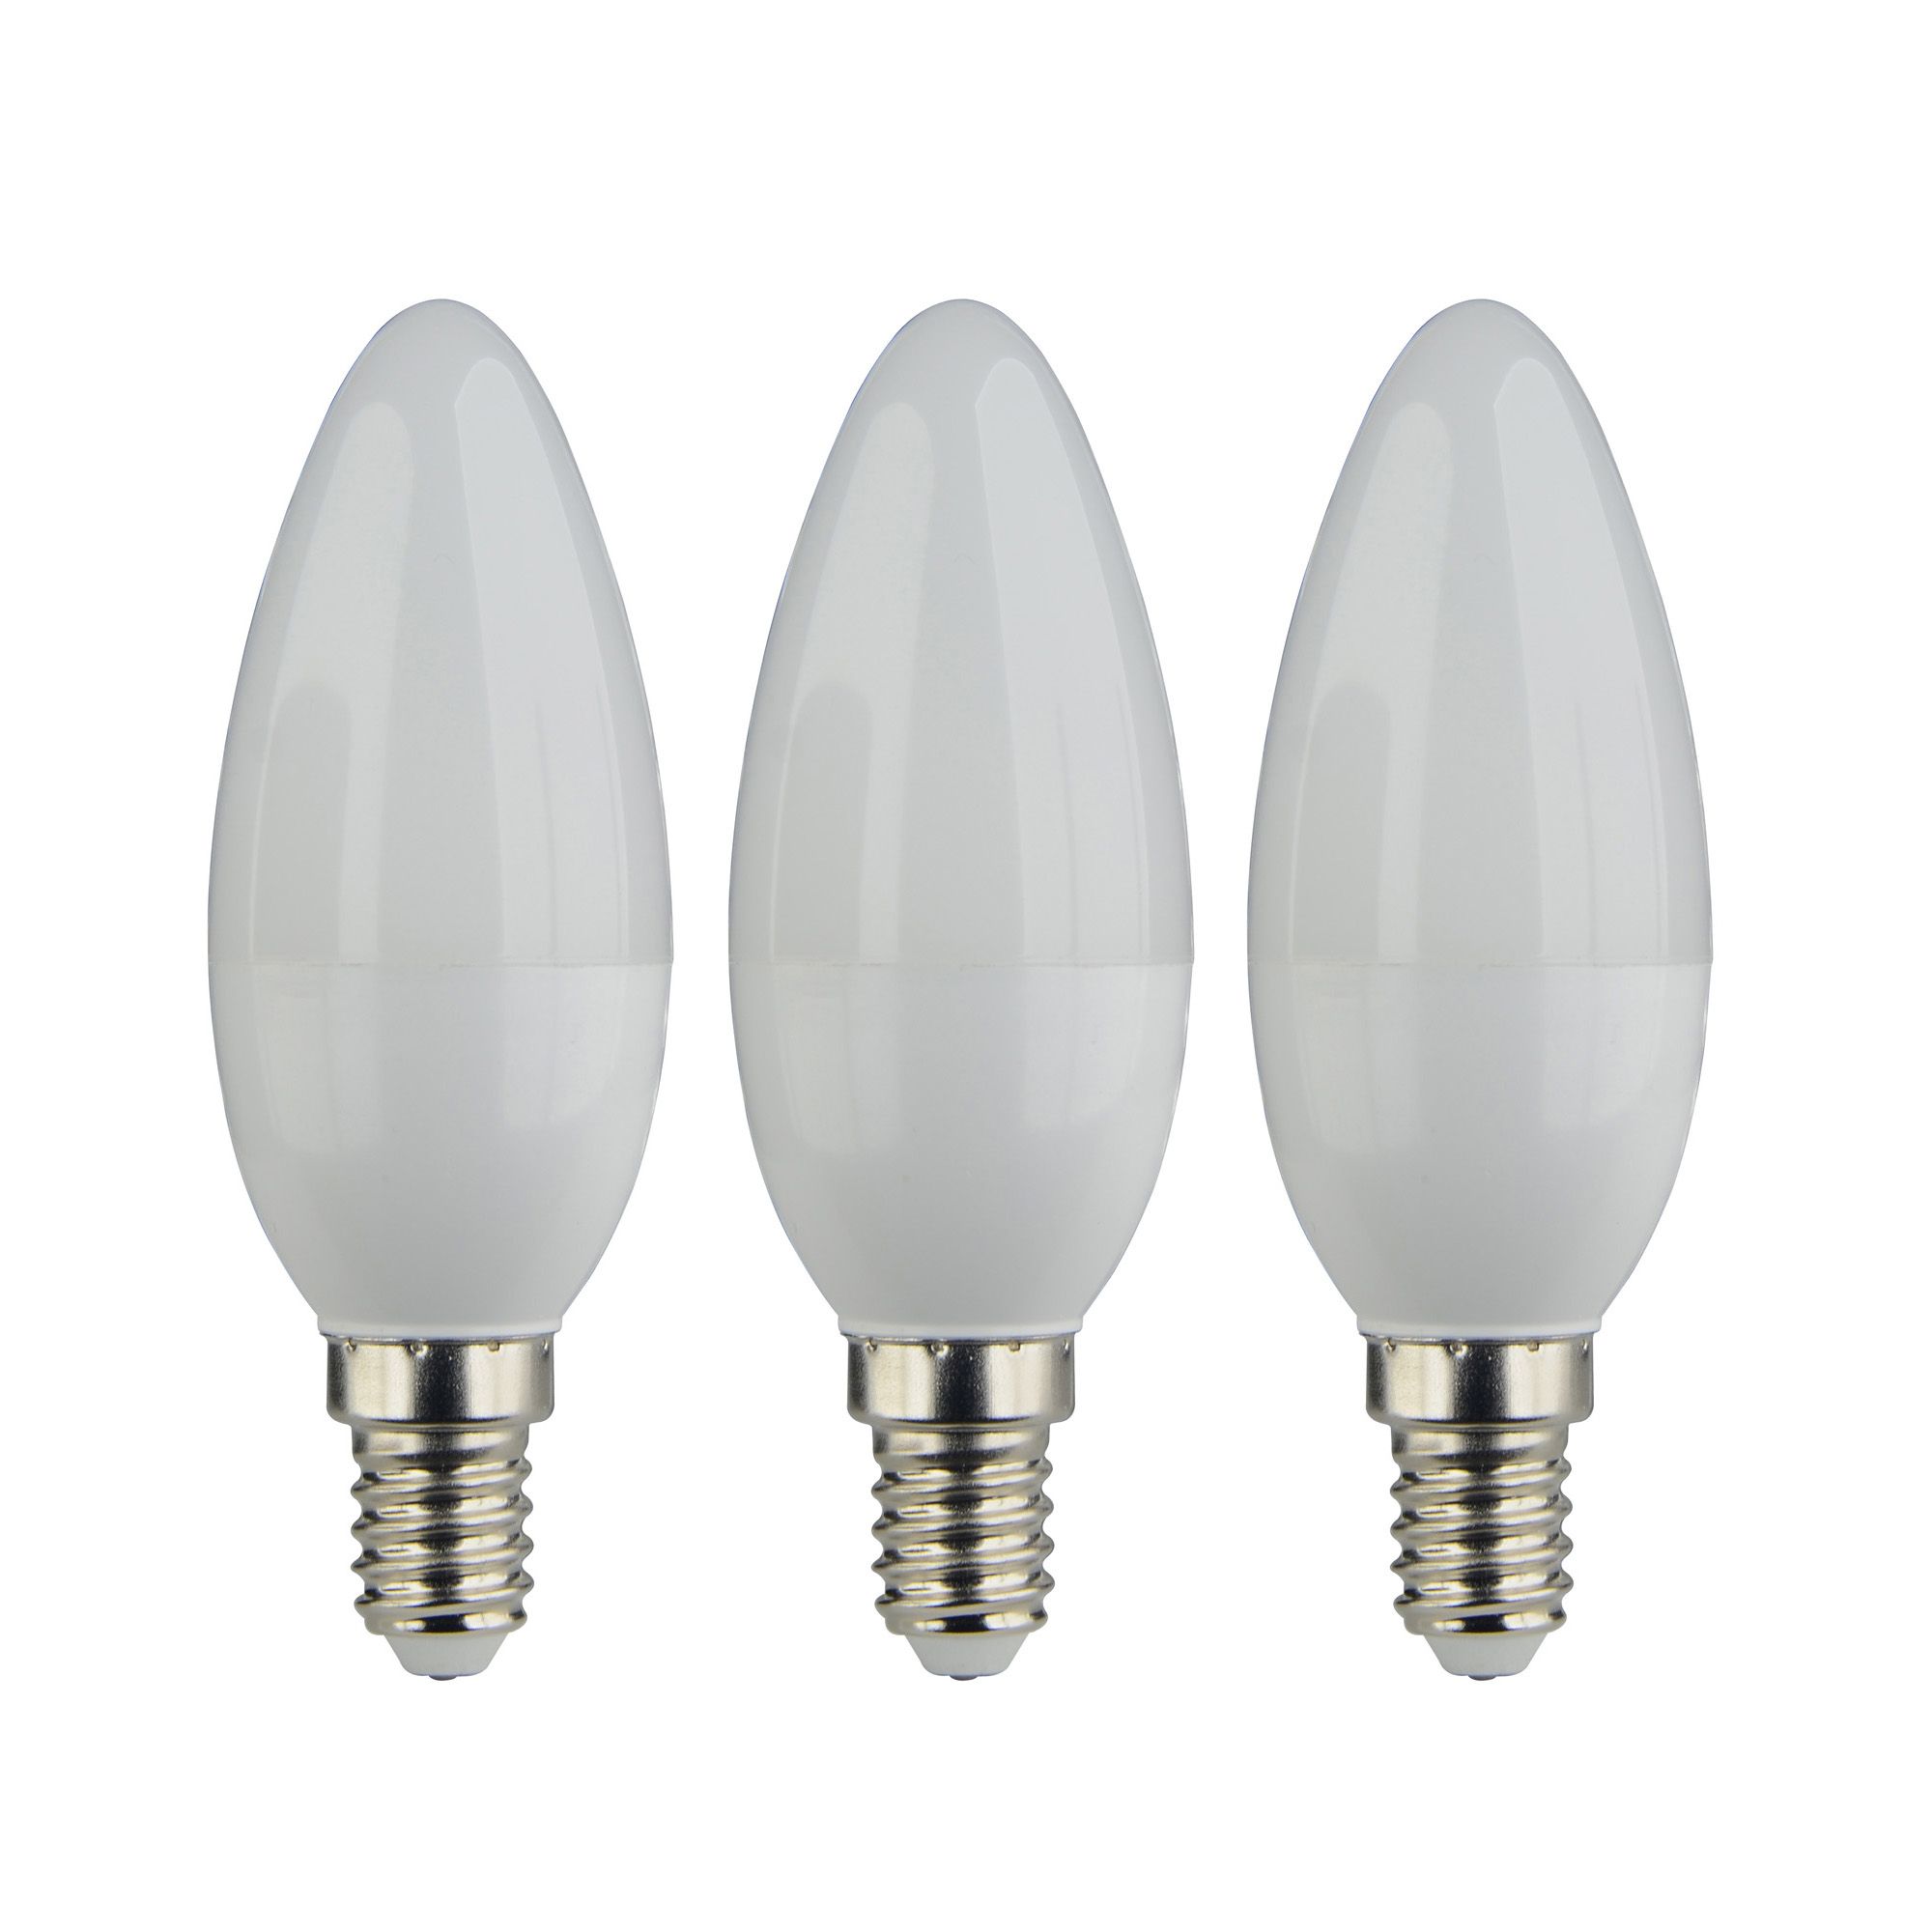 Diall 4.2W 470lm Frosted Candle Warm white LED Light bulb, Pack of 3